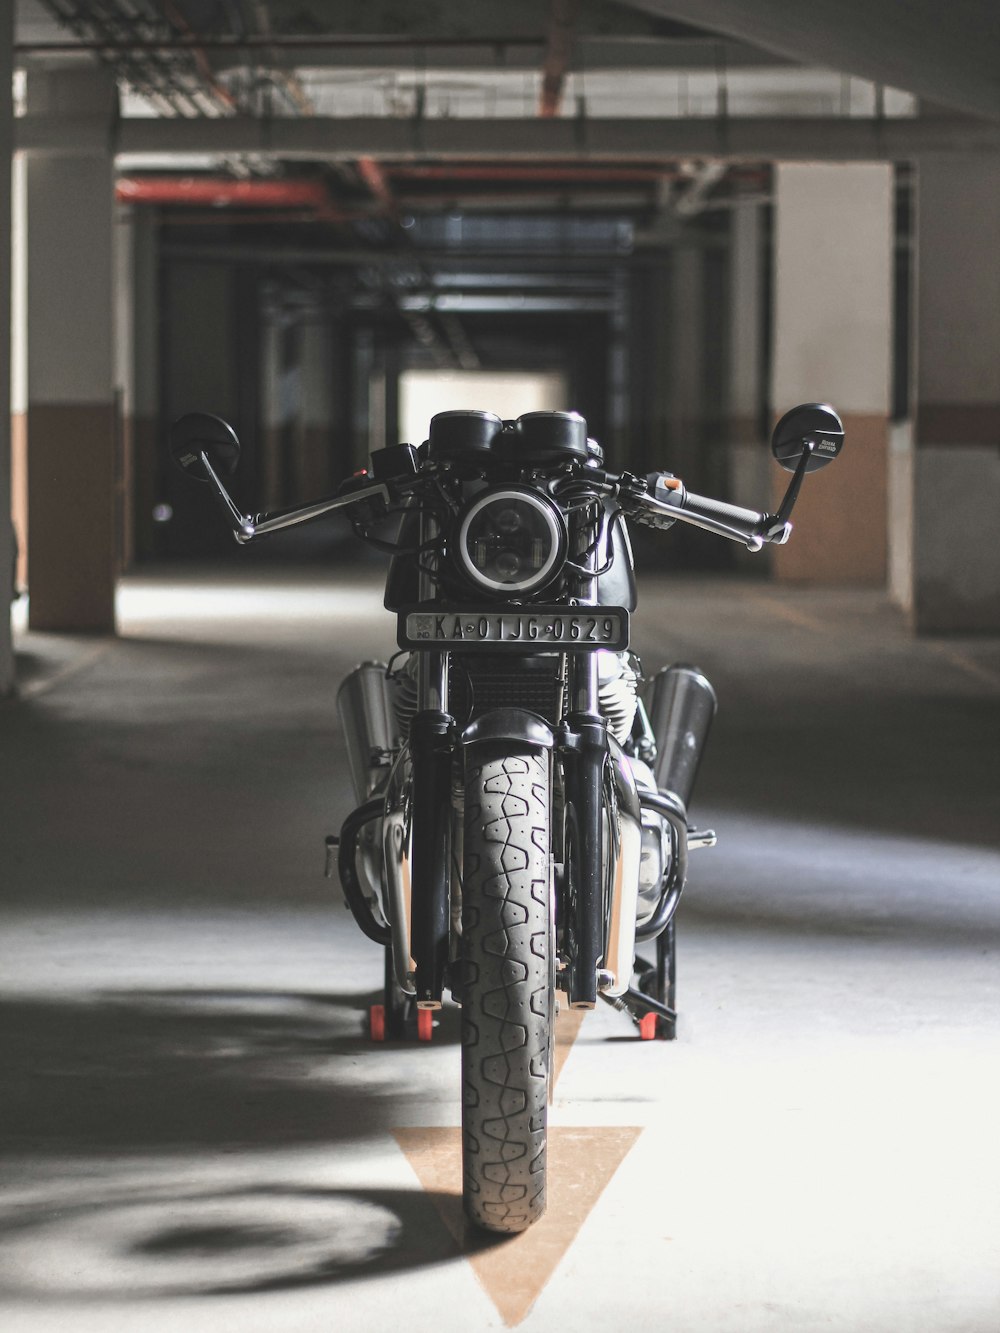 Continental Gt 650 Pictures | Download Free Images on Unsplash